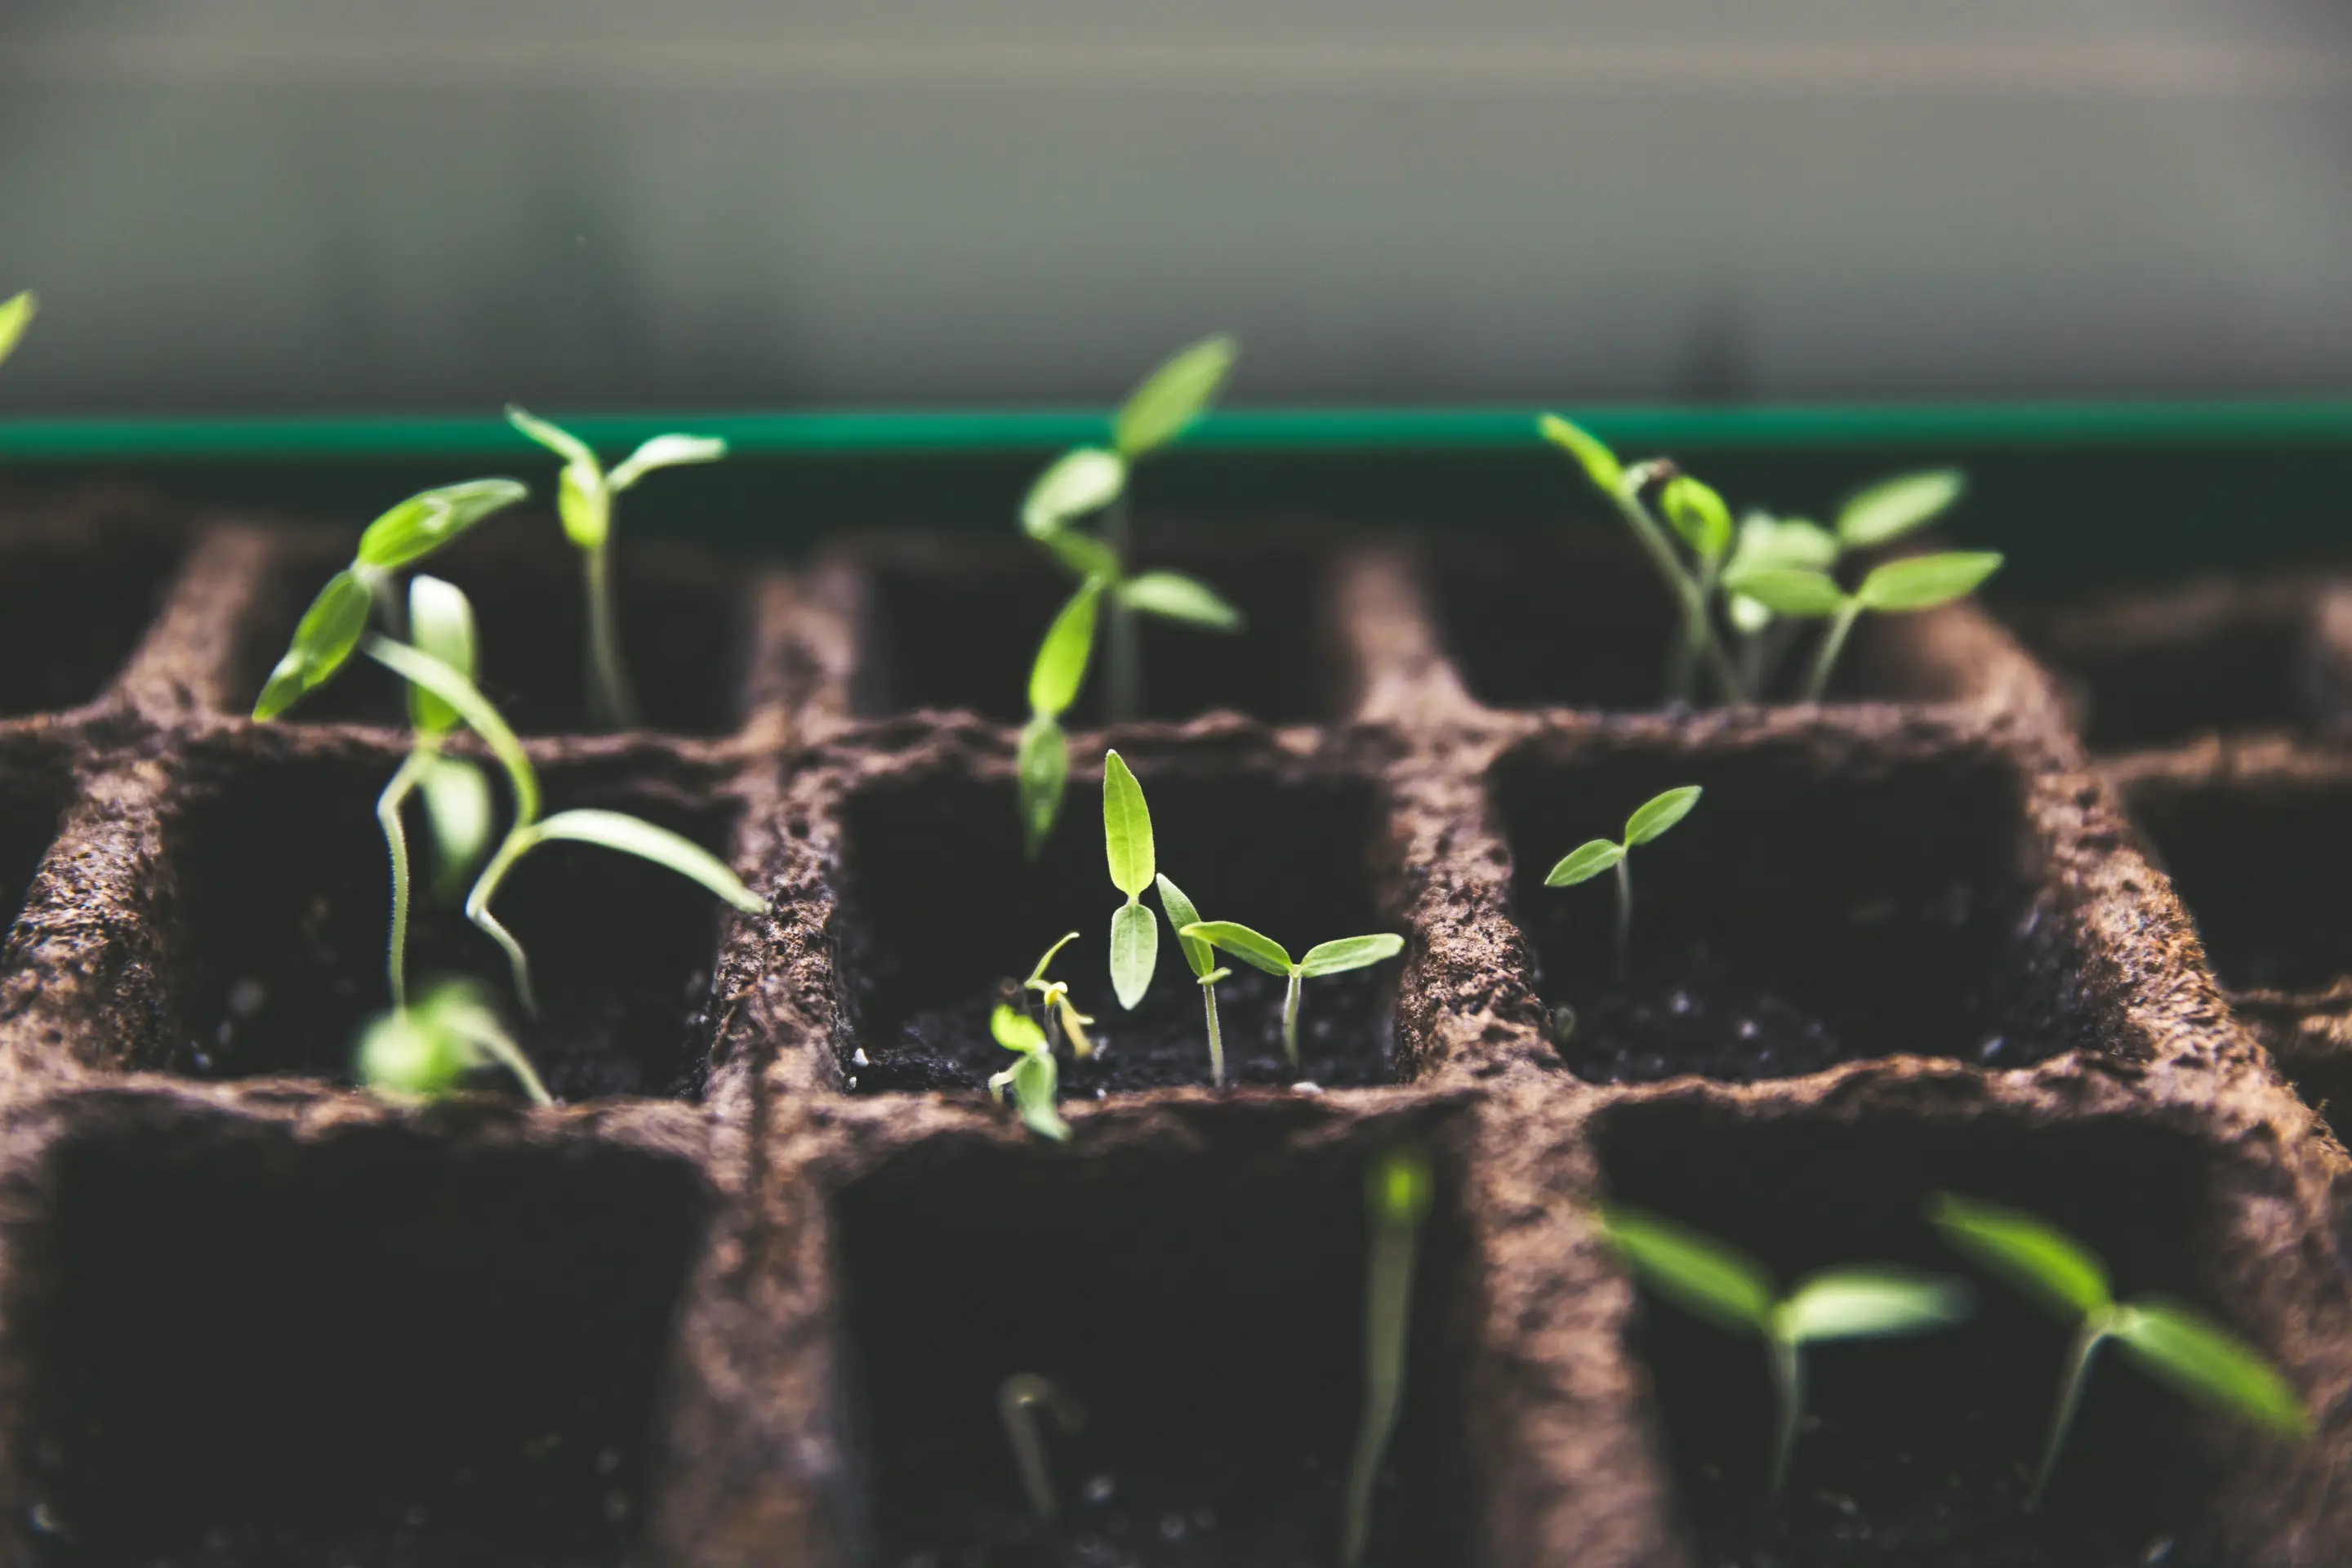 A metaphoric representation of investing in customer's loyalty with seedlings